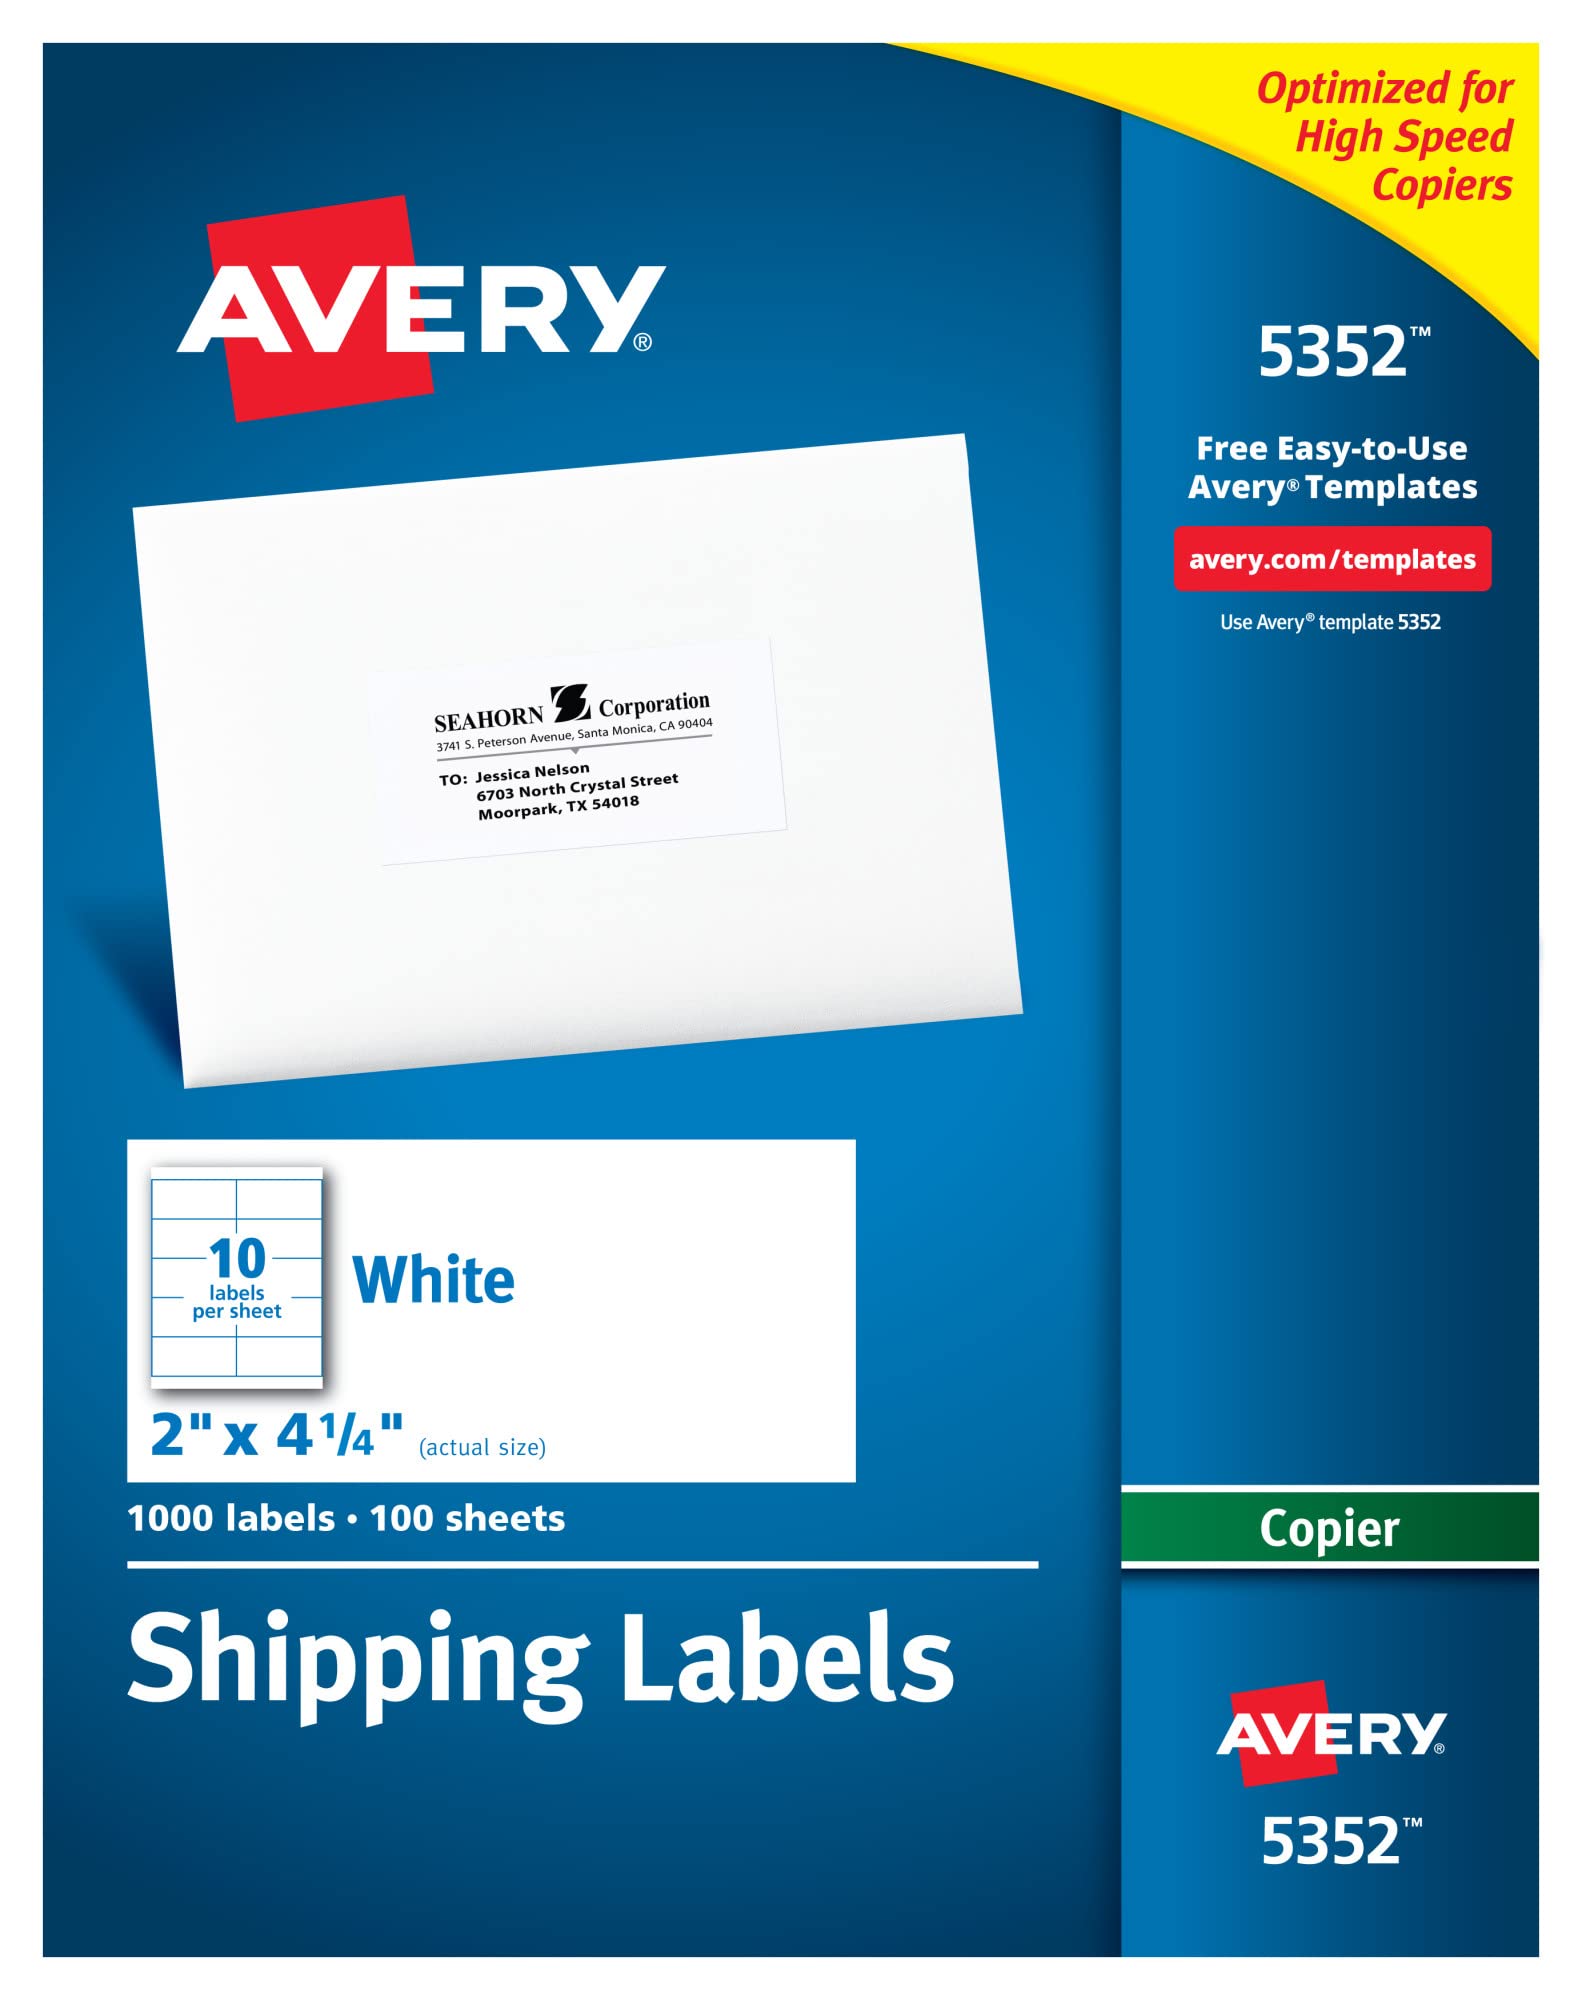 Avery Address Labels for Copiers